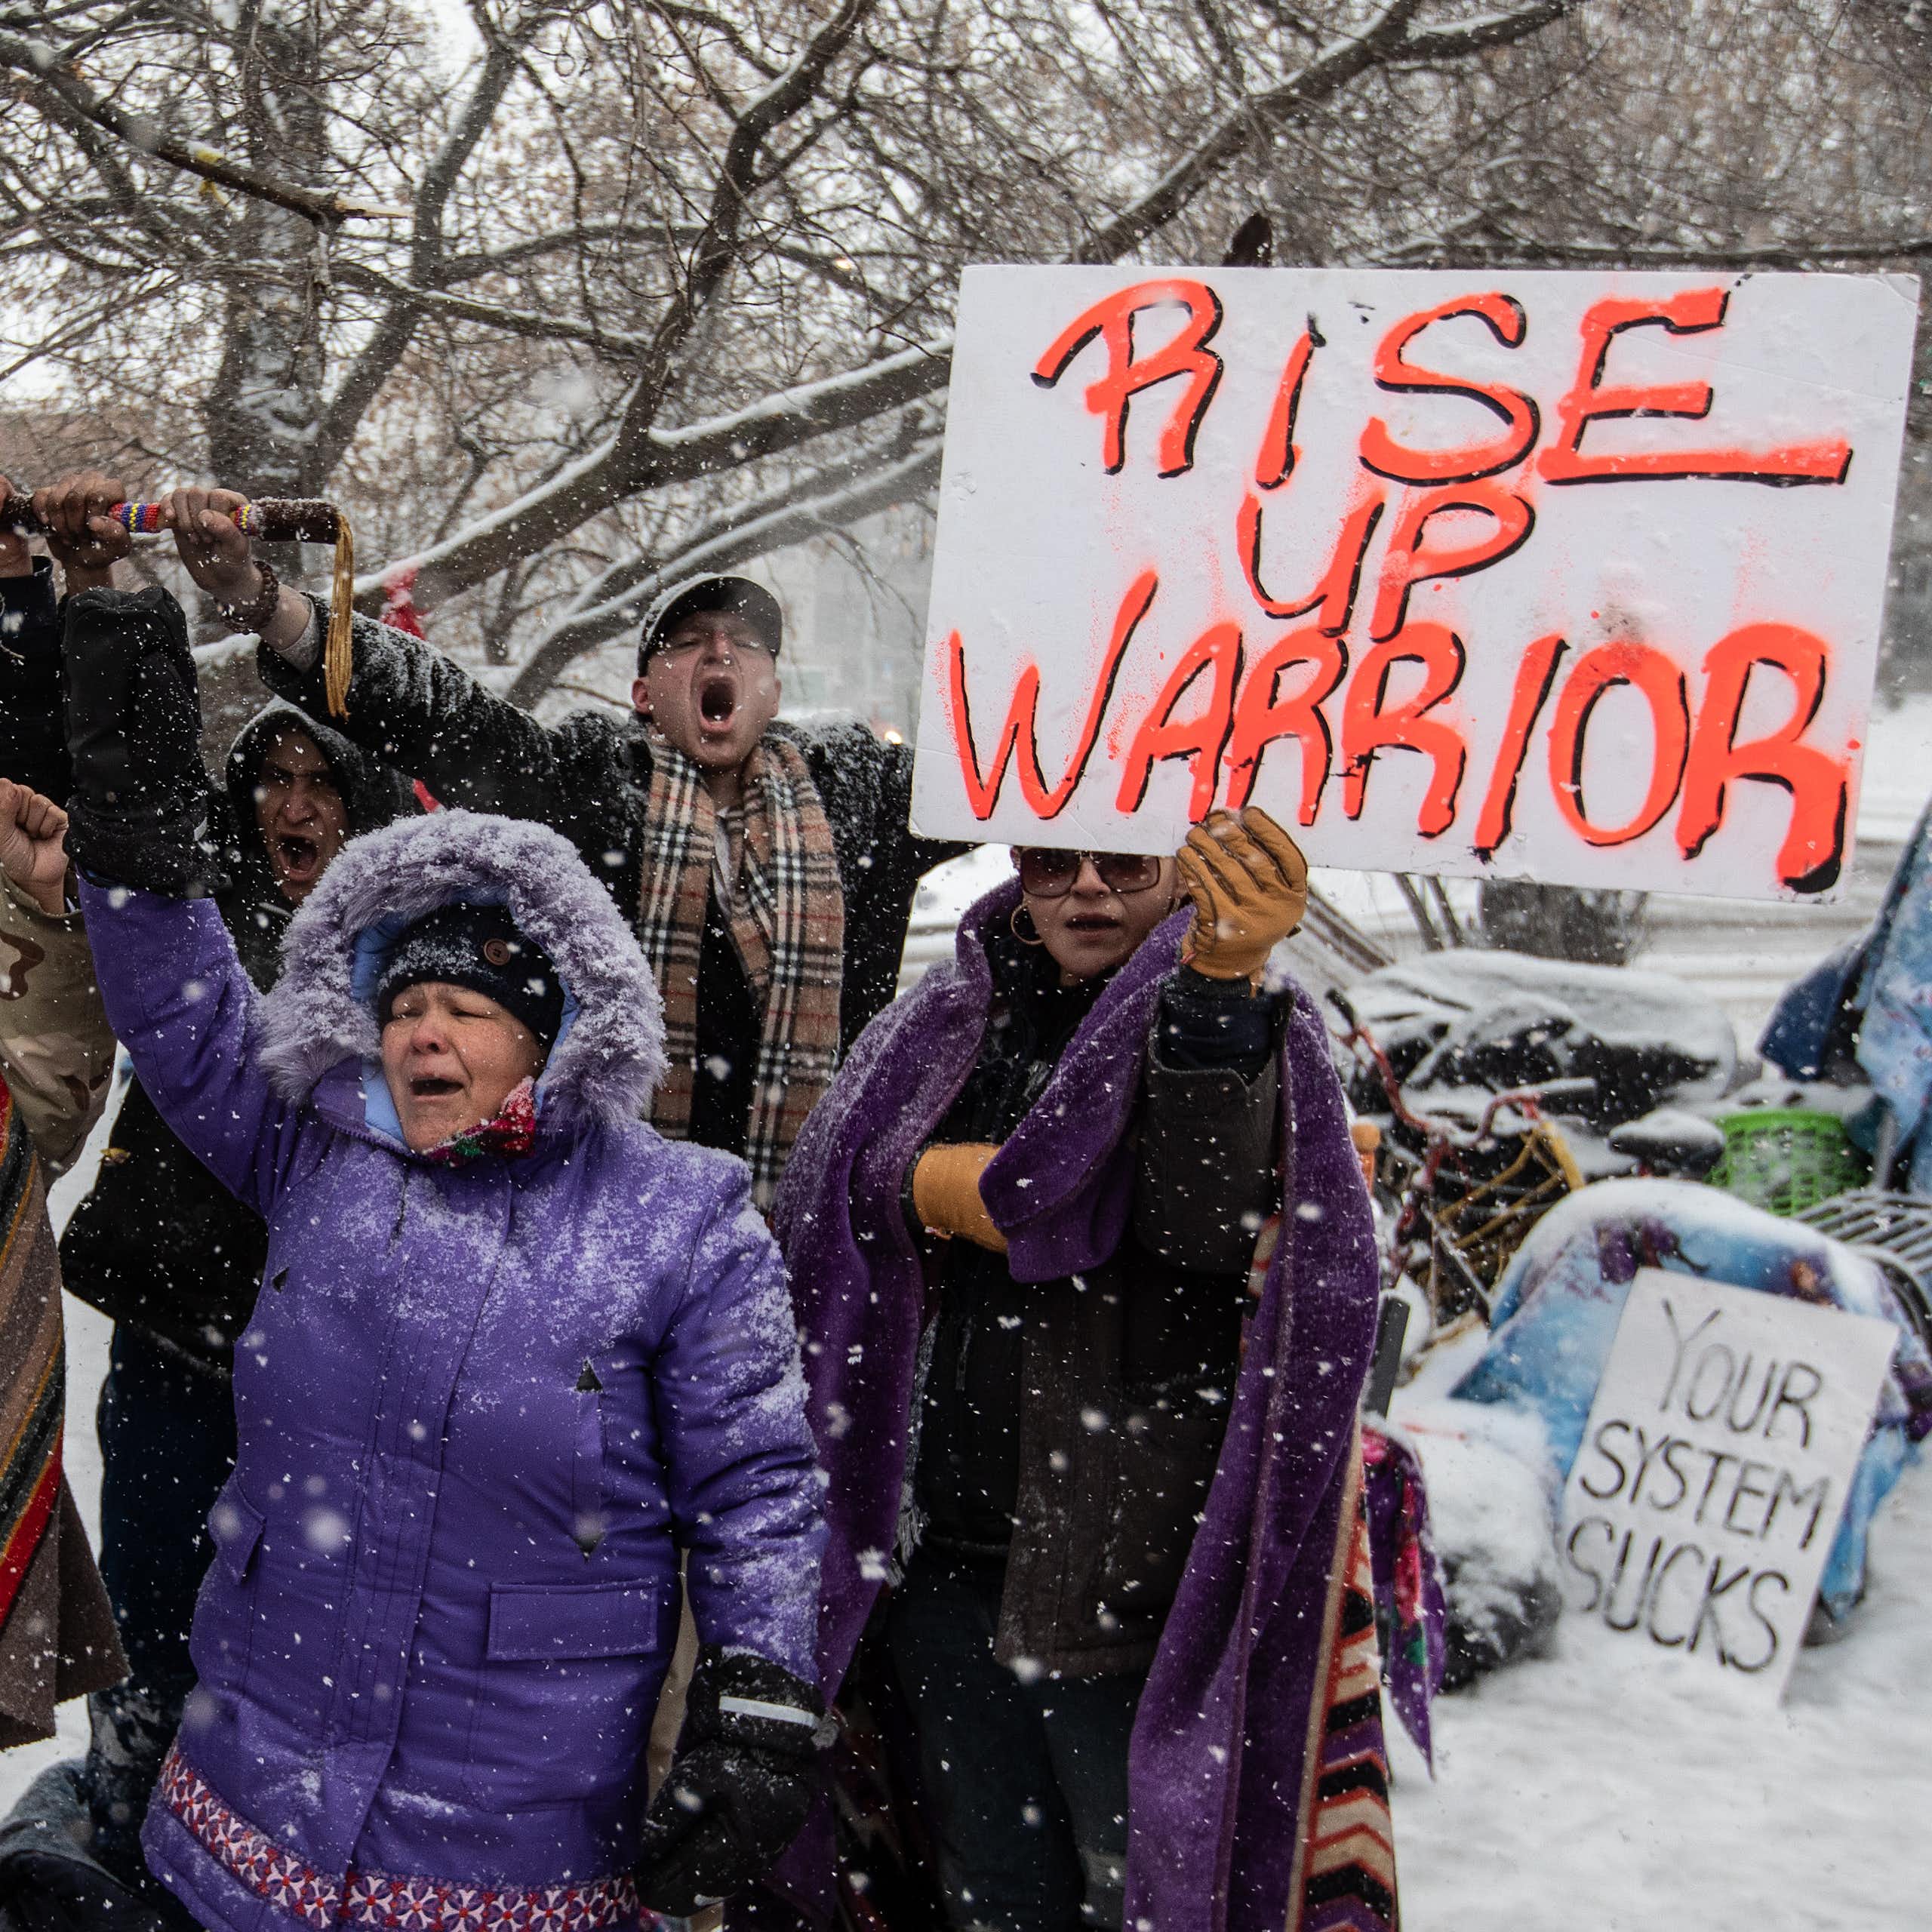 People in parkas protest in the snow, one carrying a sign that reads Rise Up Warrior.